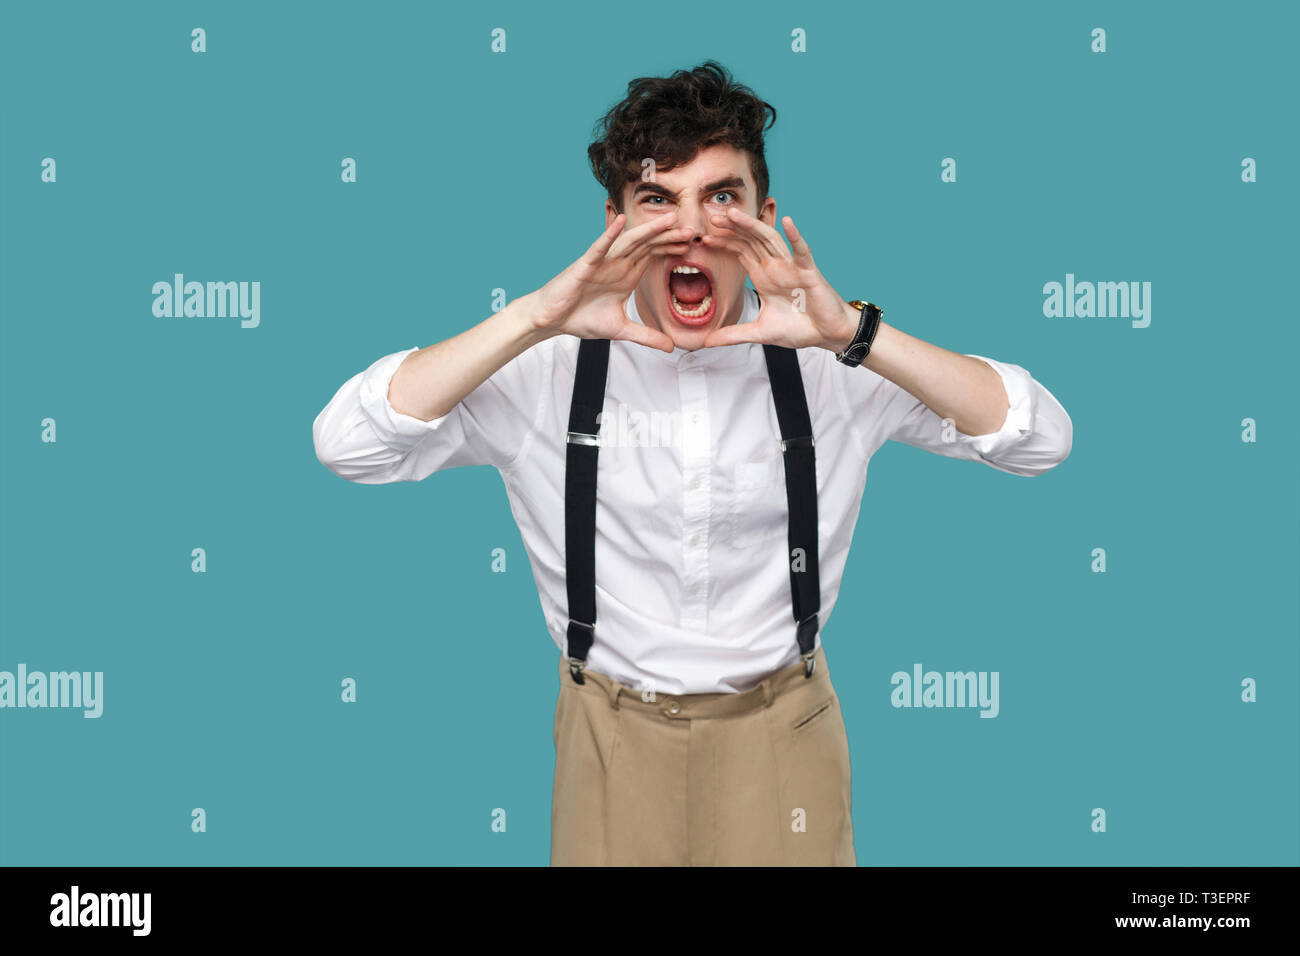 Angry man screaming and looking at camera. Portrait of handsome hipster curly young businessman in classic casual white shirt and suspender standing.  Stock Photo